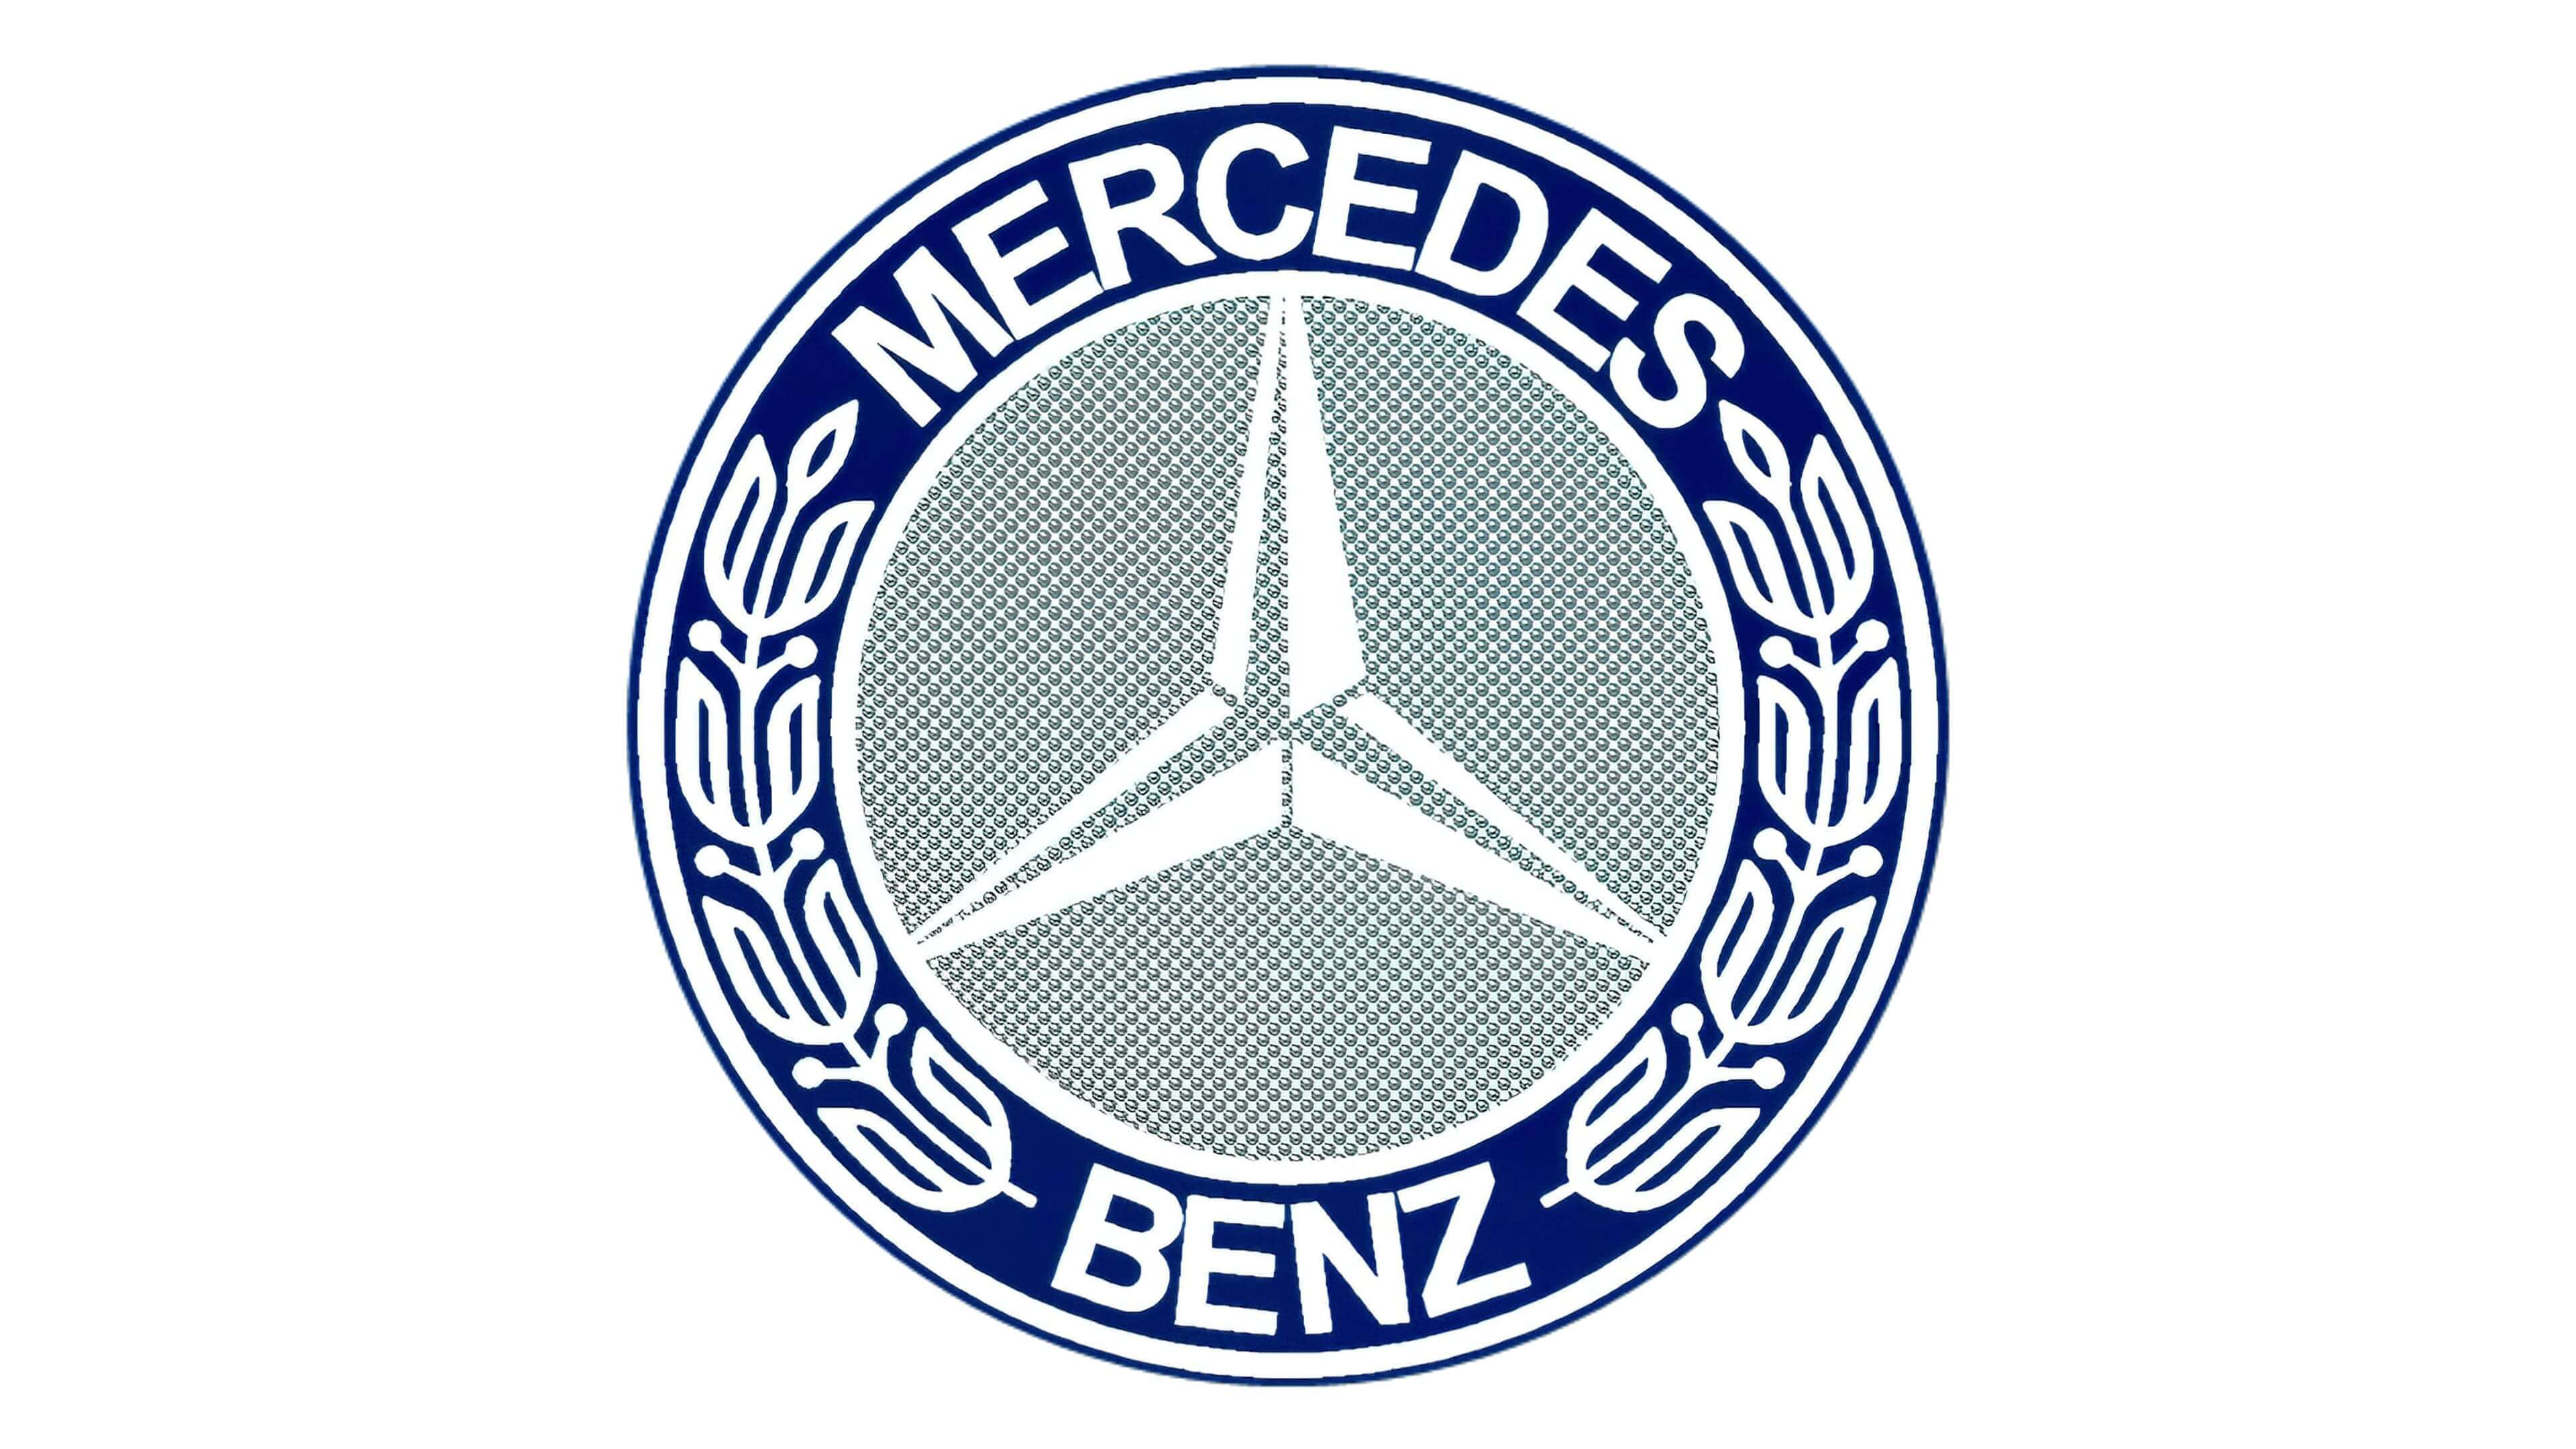 Mercedes Logo and Car Symbol Meaning